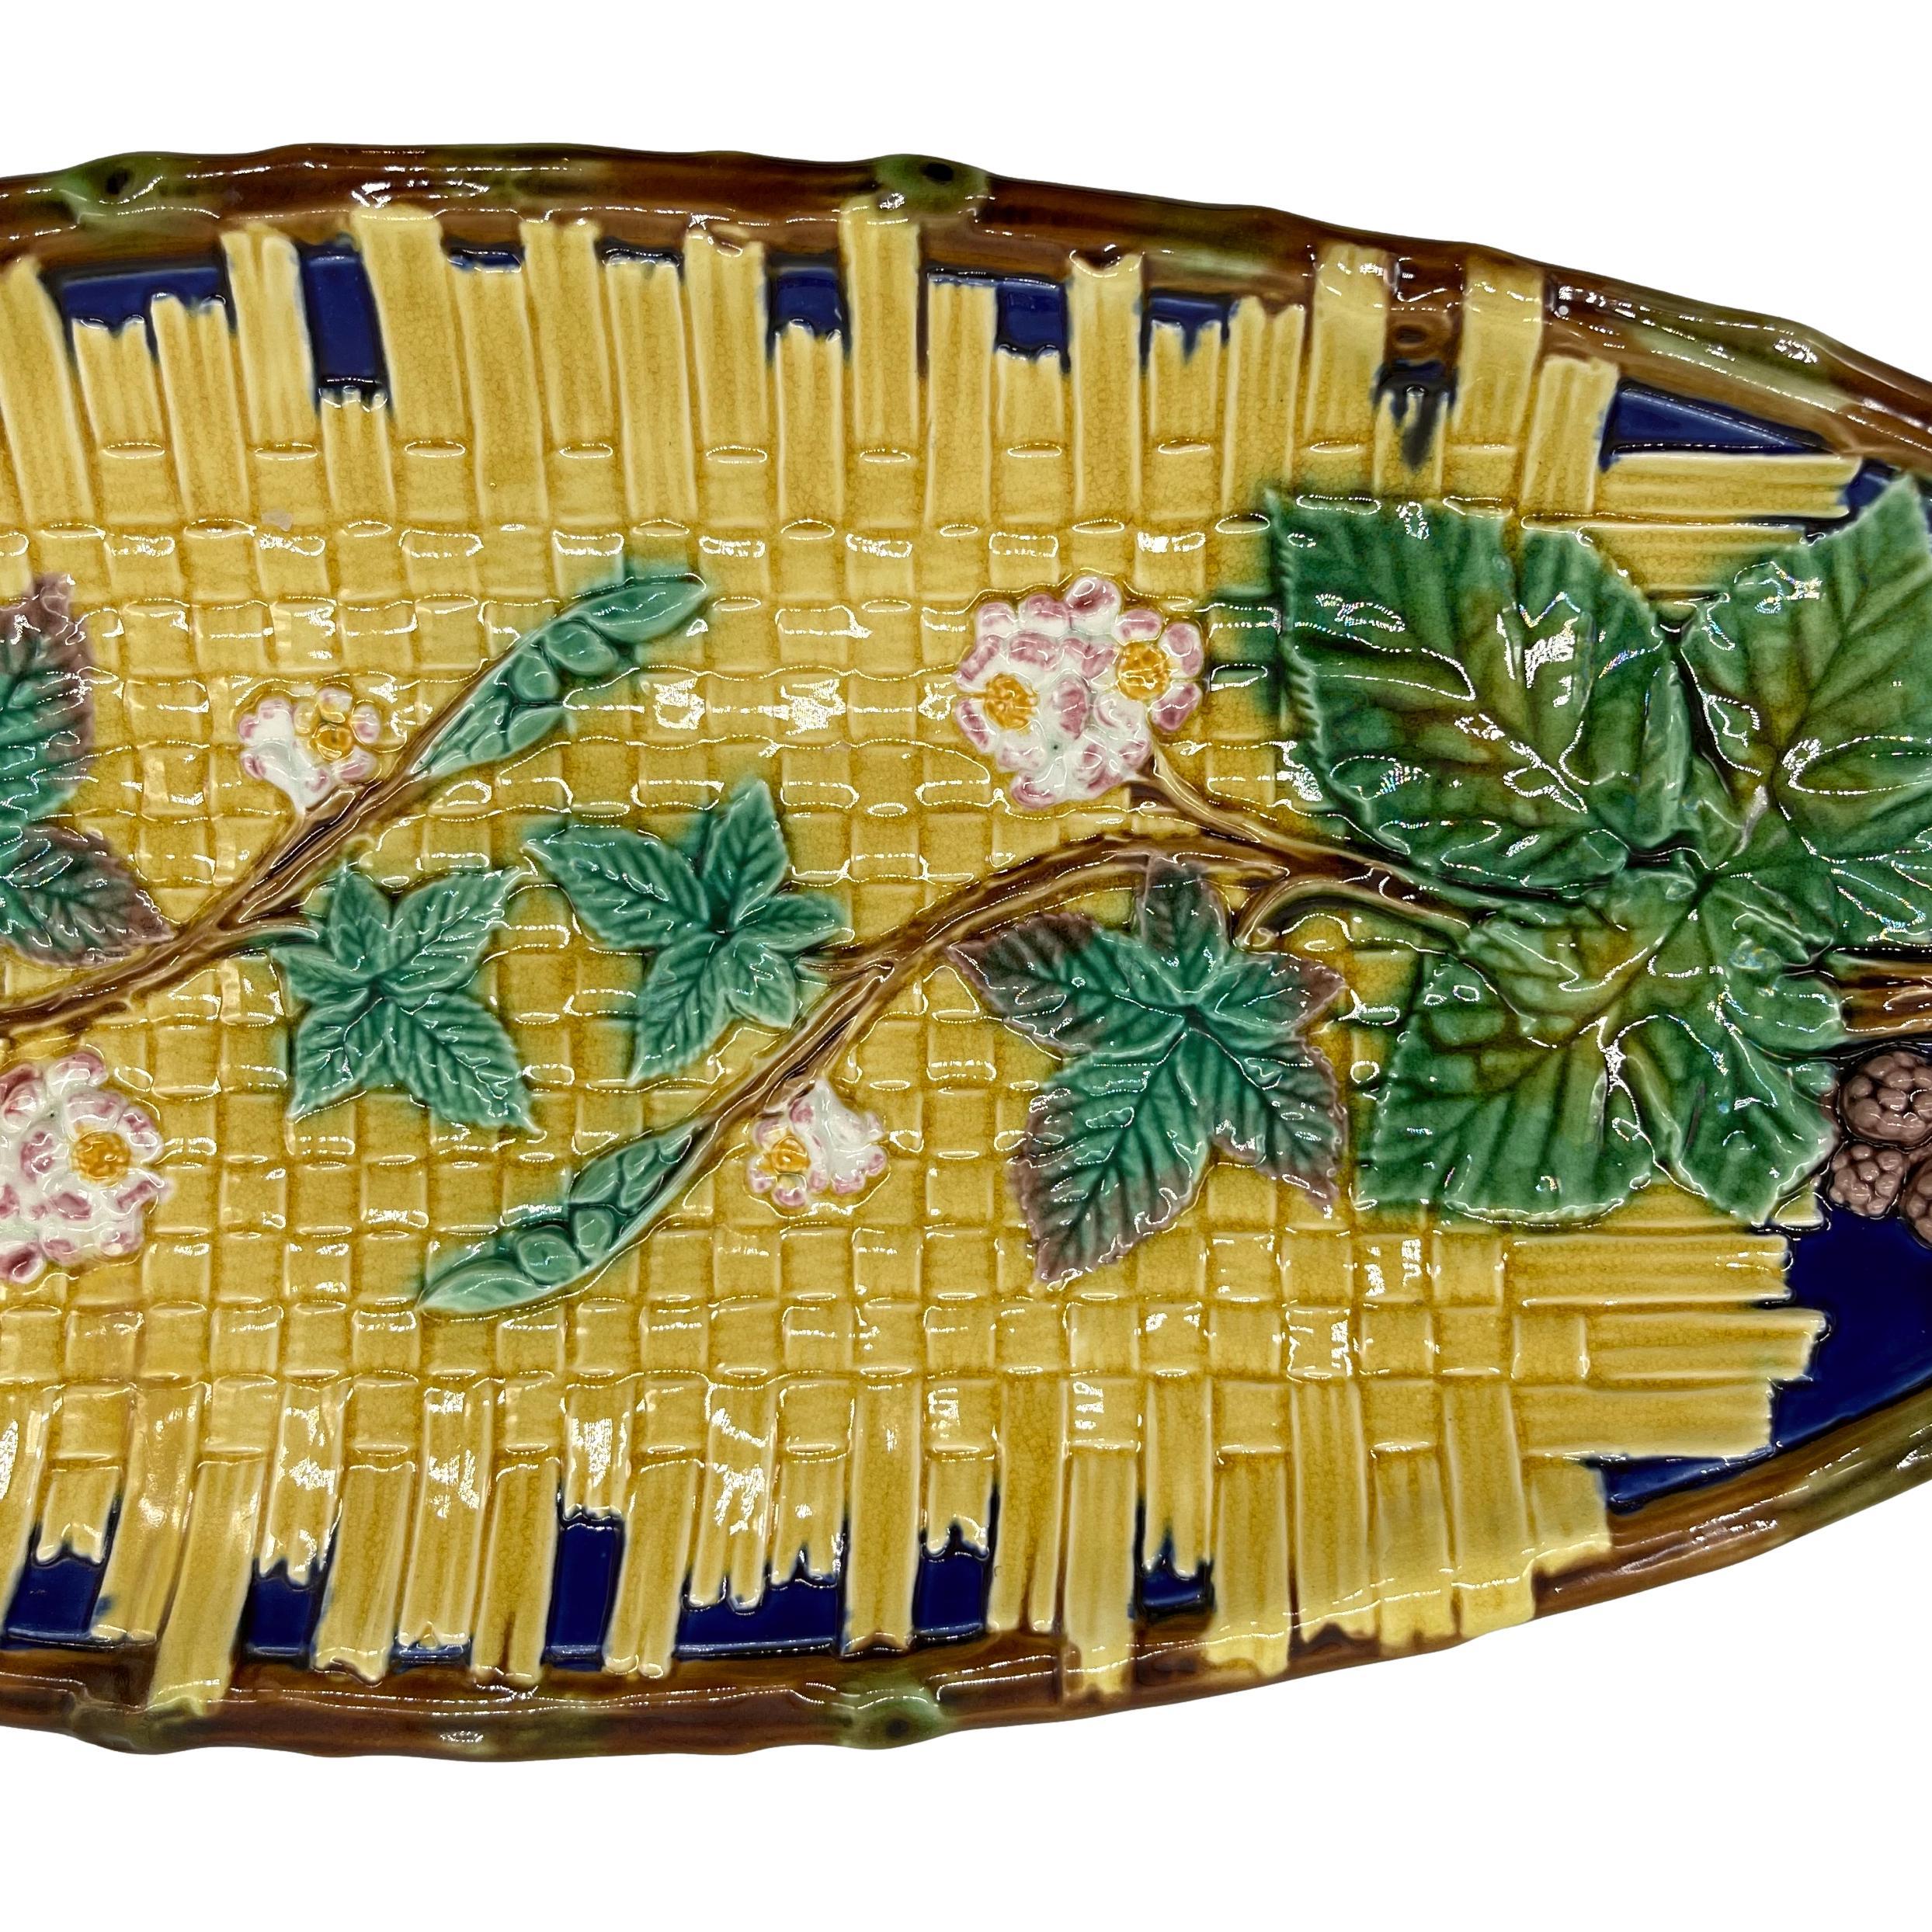 Molded Brown-Westhead, Moore Majolica Oblong Tray, Yellow on Cobalt Ground, ca. 1875